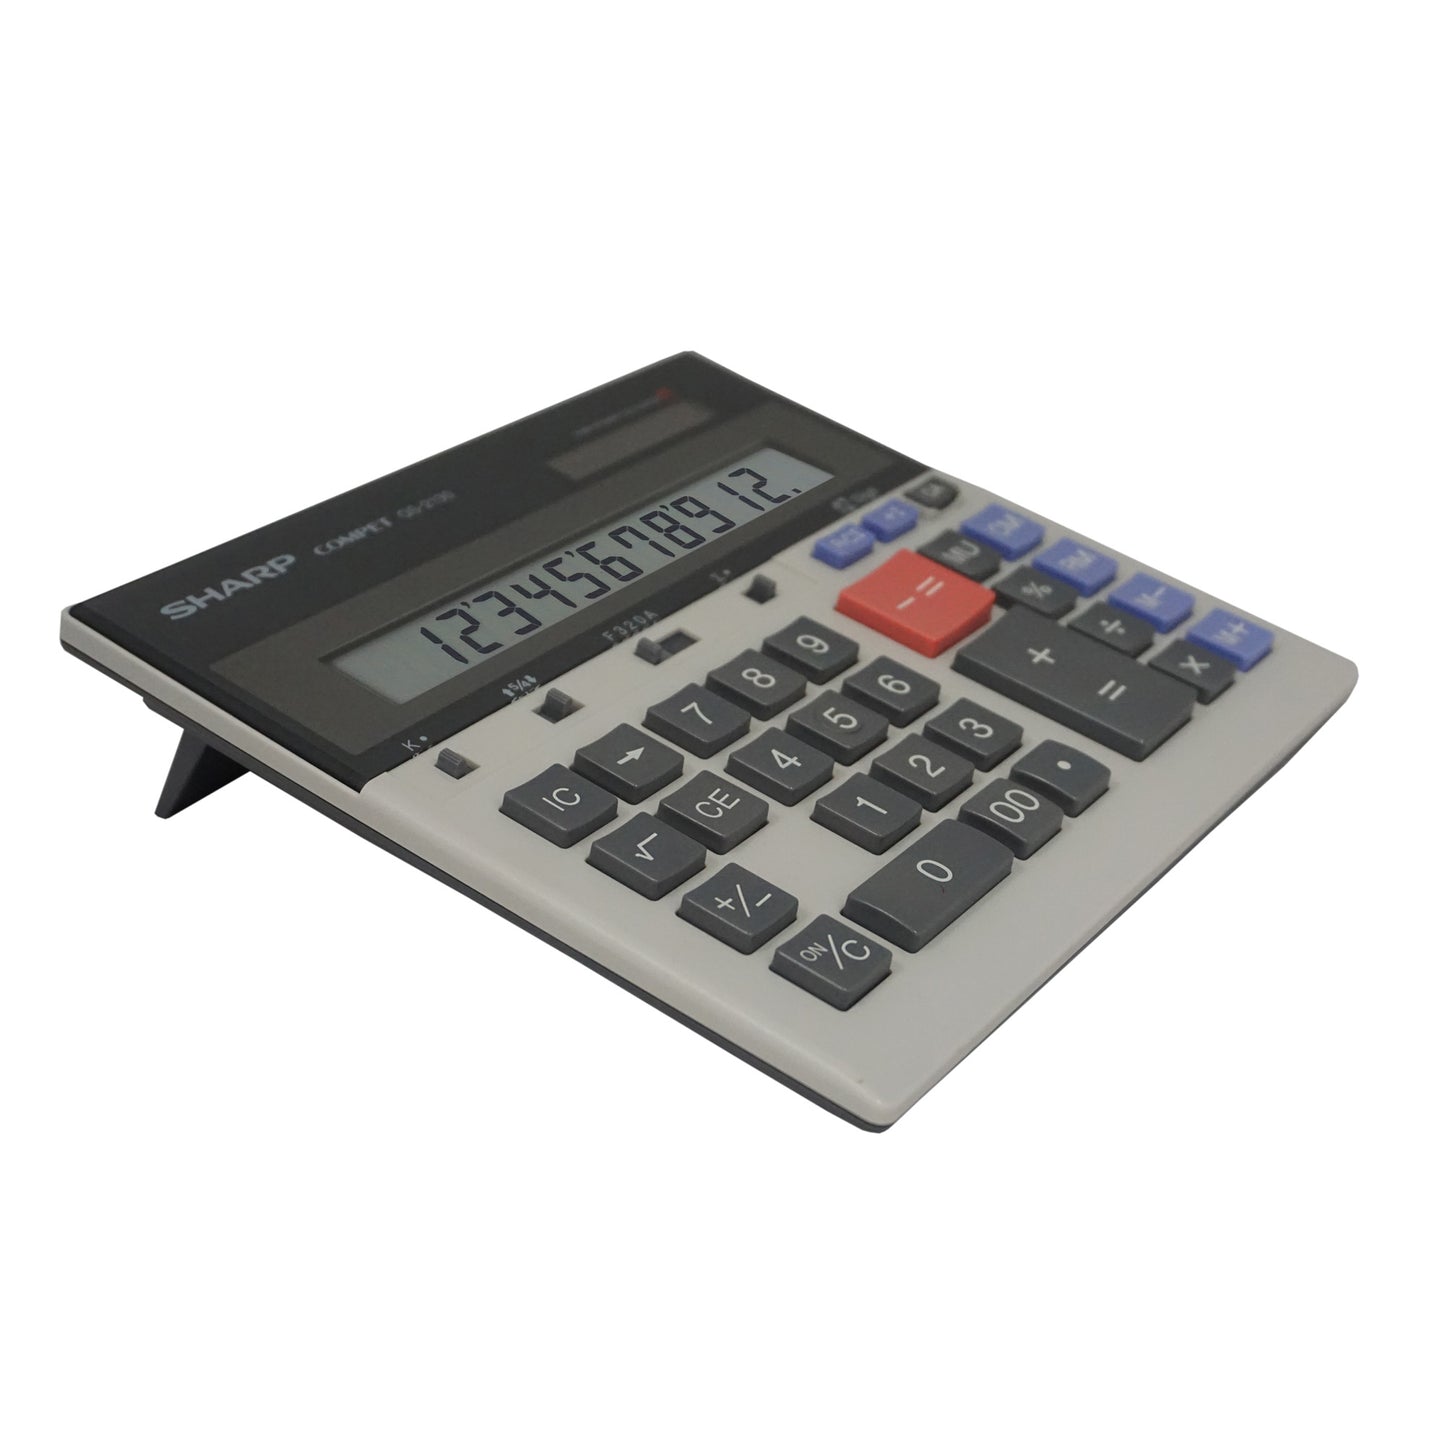 kickstand wide desktop calculator with switched and extra large plus and minus keys